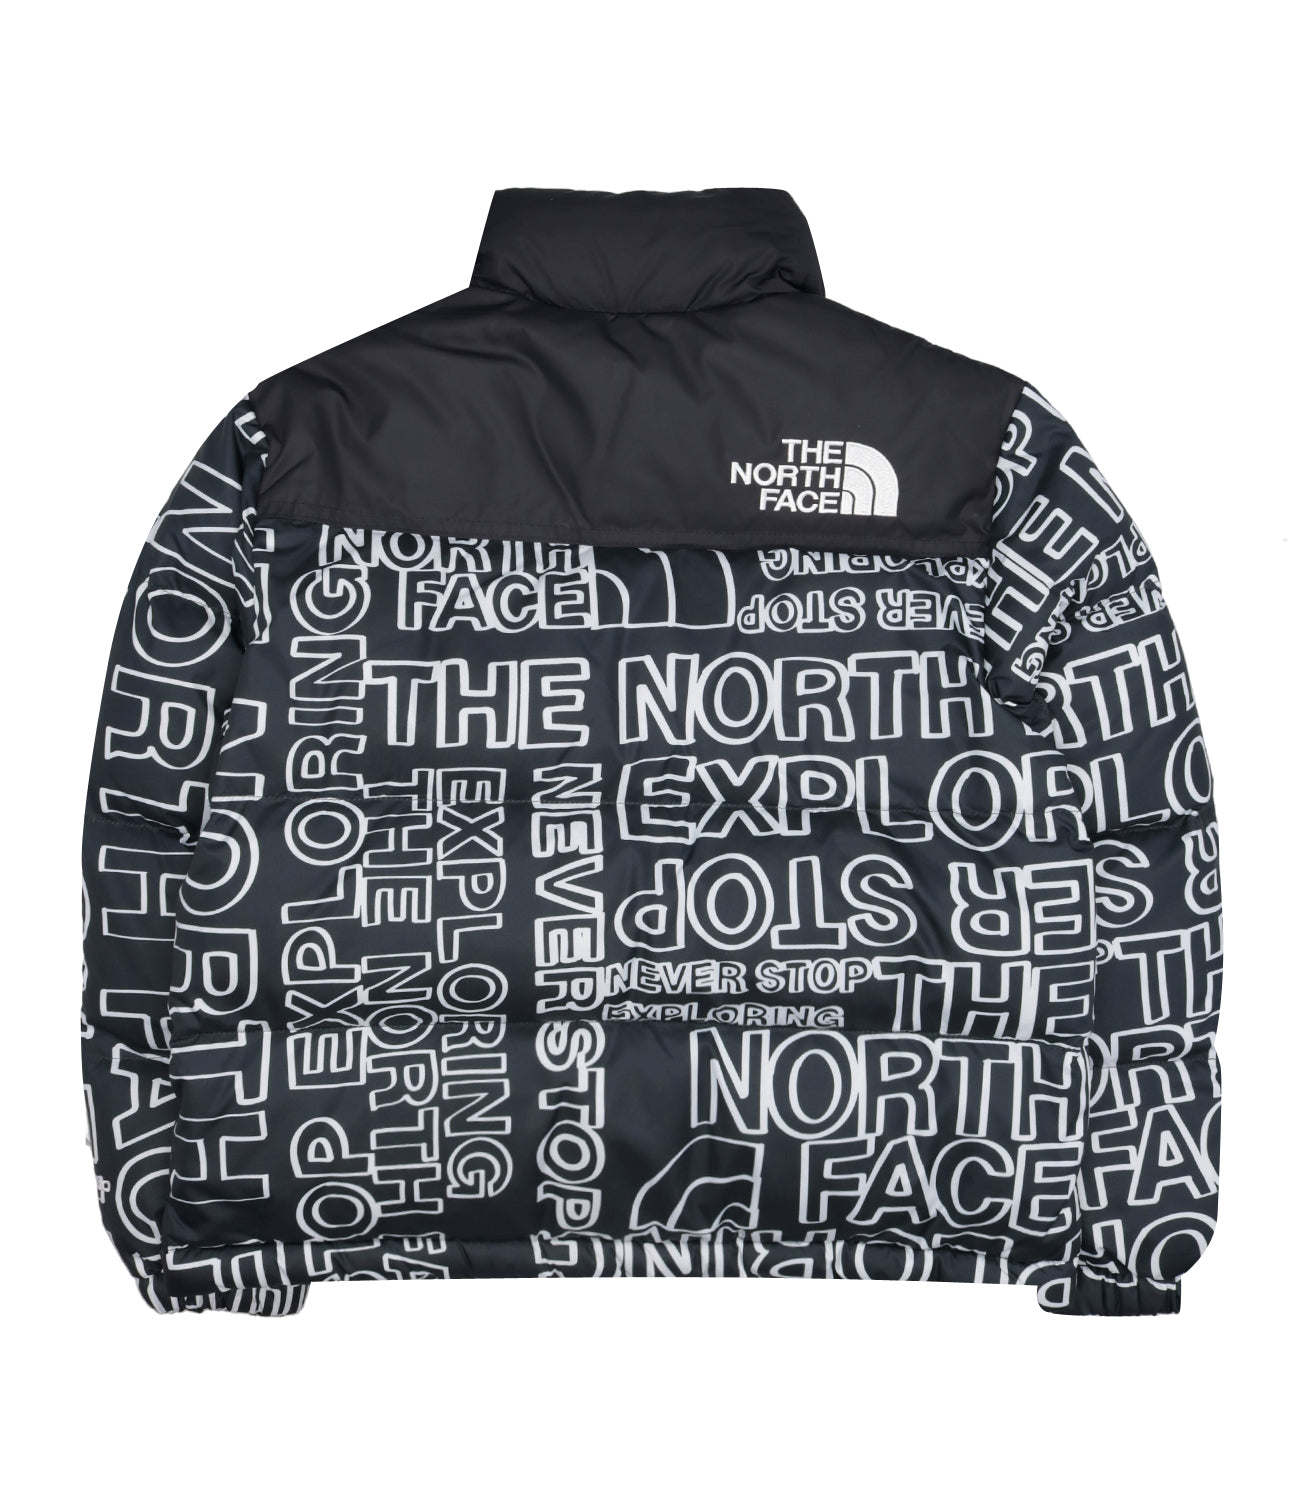 The North Face Kids | Down Jacket Teen 1996 Retro Nuptse Jacket Black and White